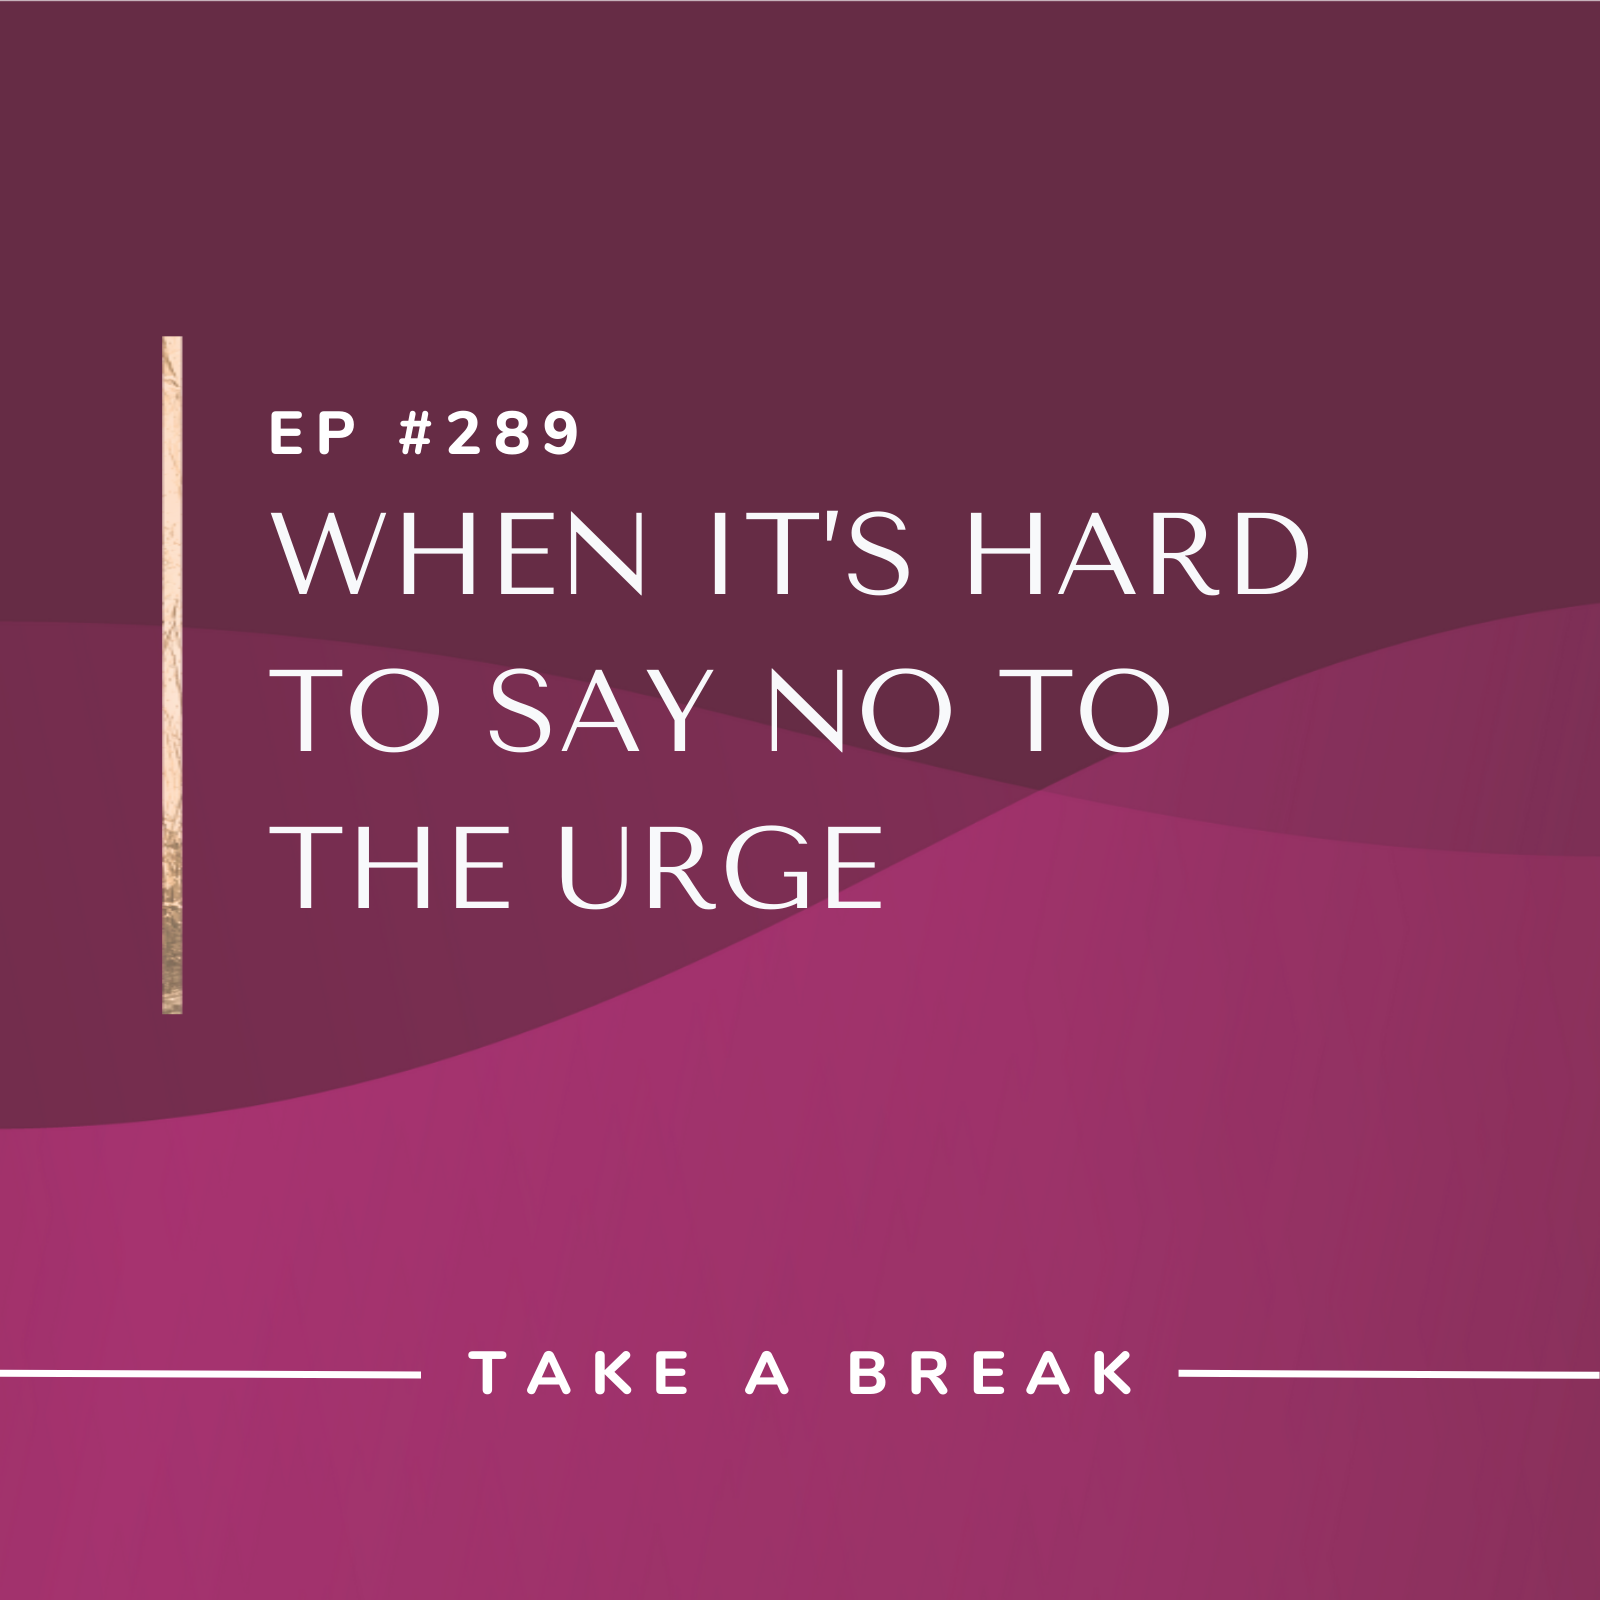 Take A Break from Drinking When it’s Hard to Say No to the Urge